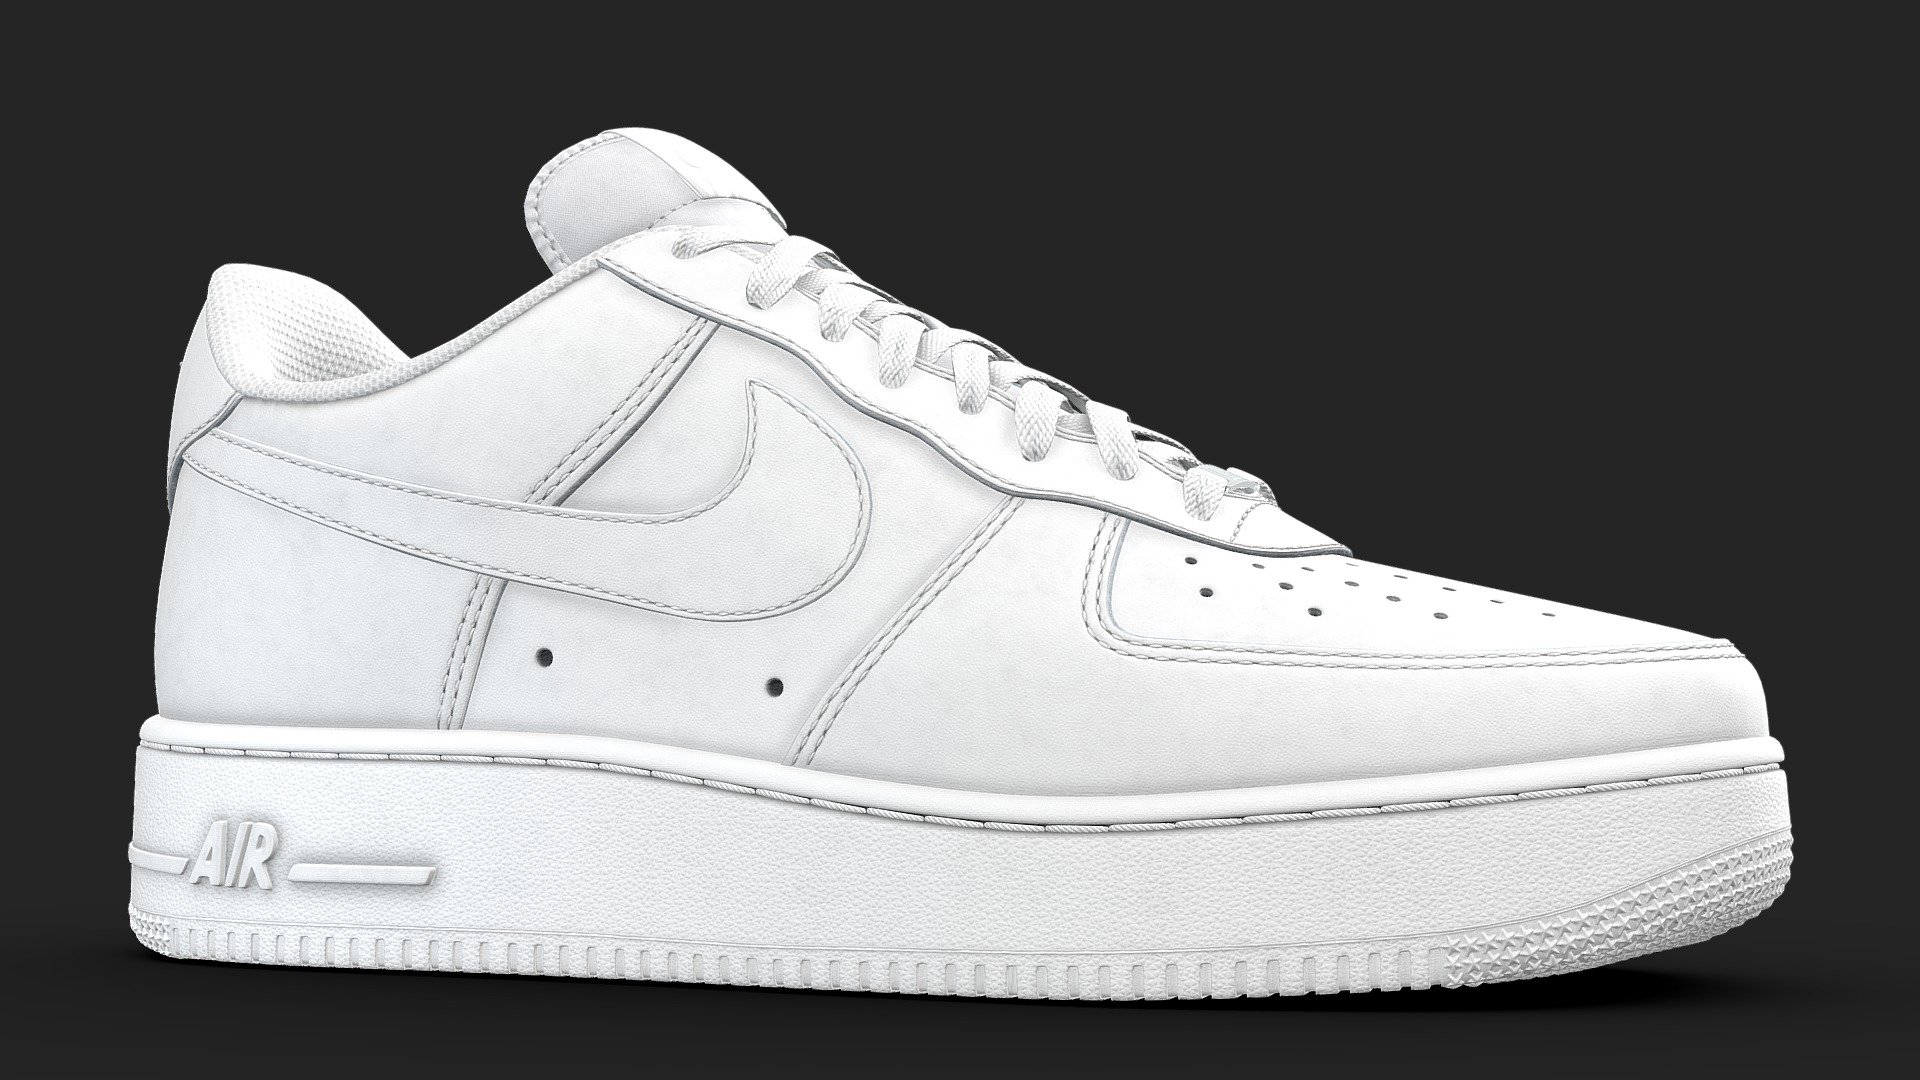 Nike Air Force 1 in Triple White. The most popular sneaker on the planet, and a staple in many wadrobes. Made with a high attention to detail, this rendition of the shoe aims provide the highest fidelity possible.

The shoe displayed here has been subdivided once, as have the obj and fbx files. The blender file will allow you change this detail, and also has the added details of stitches and the stars on the sole as seperate objects so they can be removed if desired (though the shoe looks best with them).

There are four texture sets for each shoe with the maps being Base Color, Metallic, Roughness, Normal, Opacity (through the alpha channel of the base color). These maps are at a resolution of 4096x4096 in png

This subdivided version has 517,927 polys, with the unsubdived coming in at 130,332. An optimised version is included, which uses just one texture set and has 15,605 polys, it can be previewed here: https://skfb.ly/oE7wV
Finally, the black colourway of this shoe is included in the additional files - Nike Air Force One White - Buy Royalty Free 3D model by Joe-Wall (@joewall) 3d model